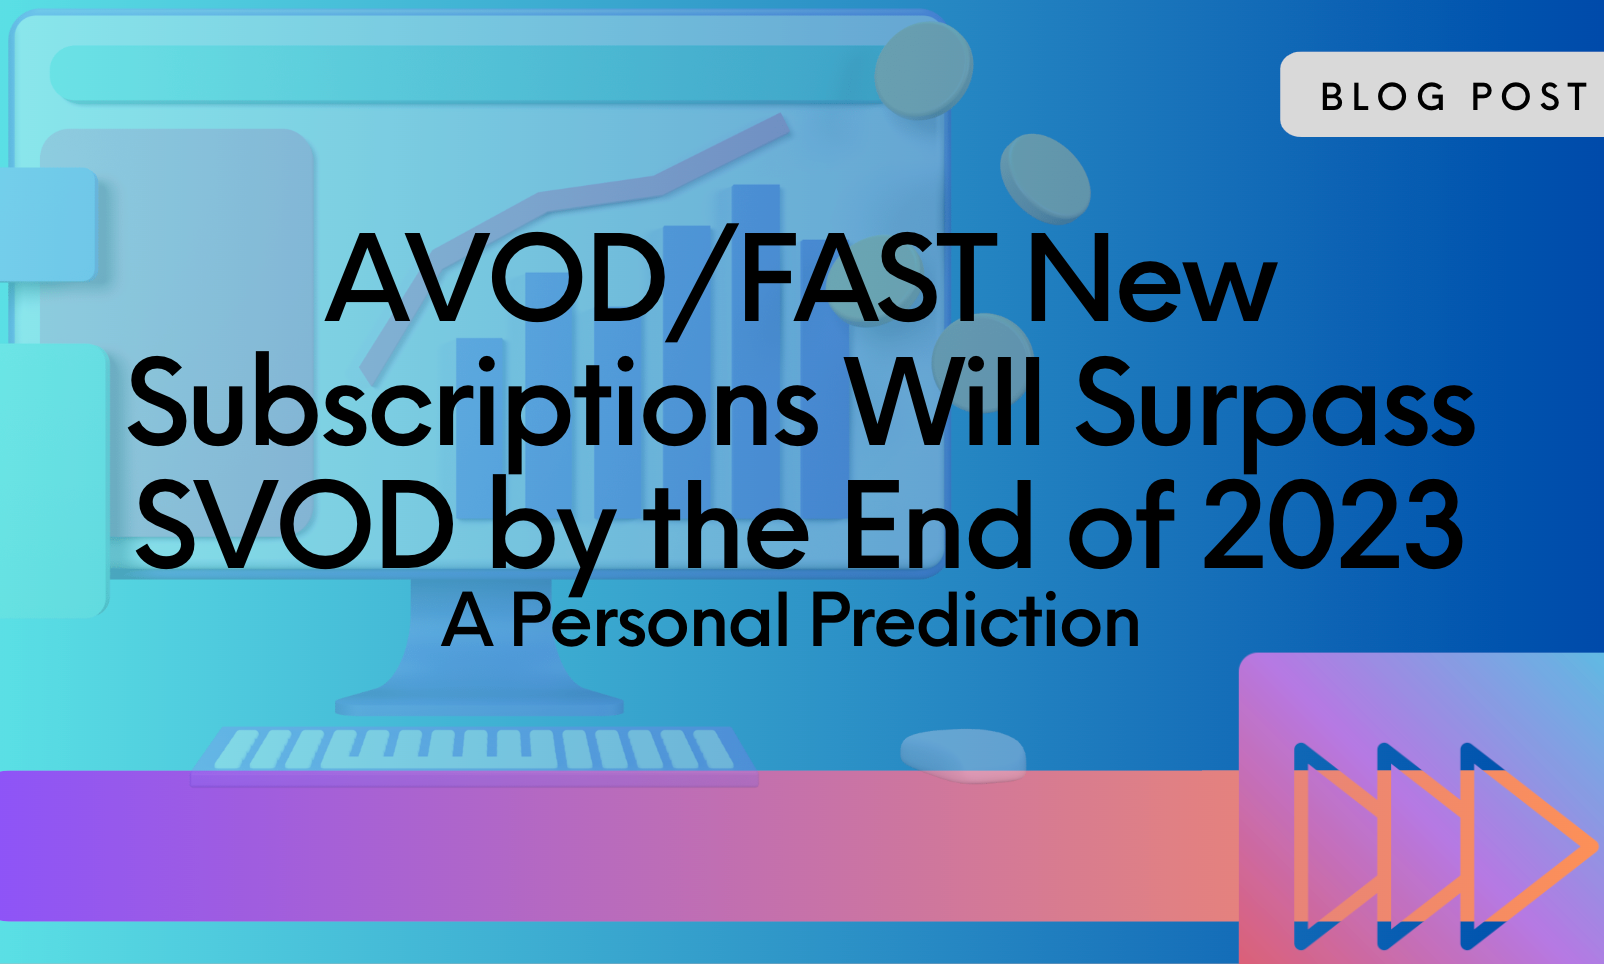 Could AVOD and FAST New Subscriptions Surpass SVOD by the End of 2023?